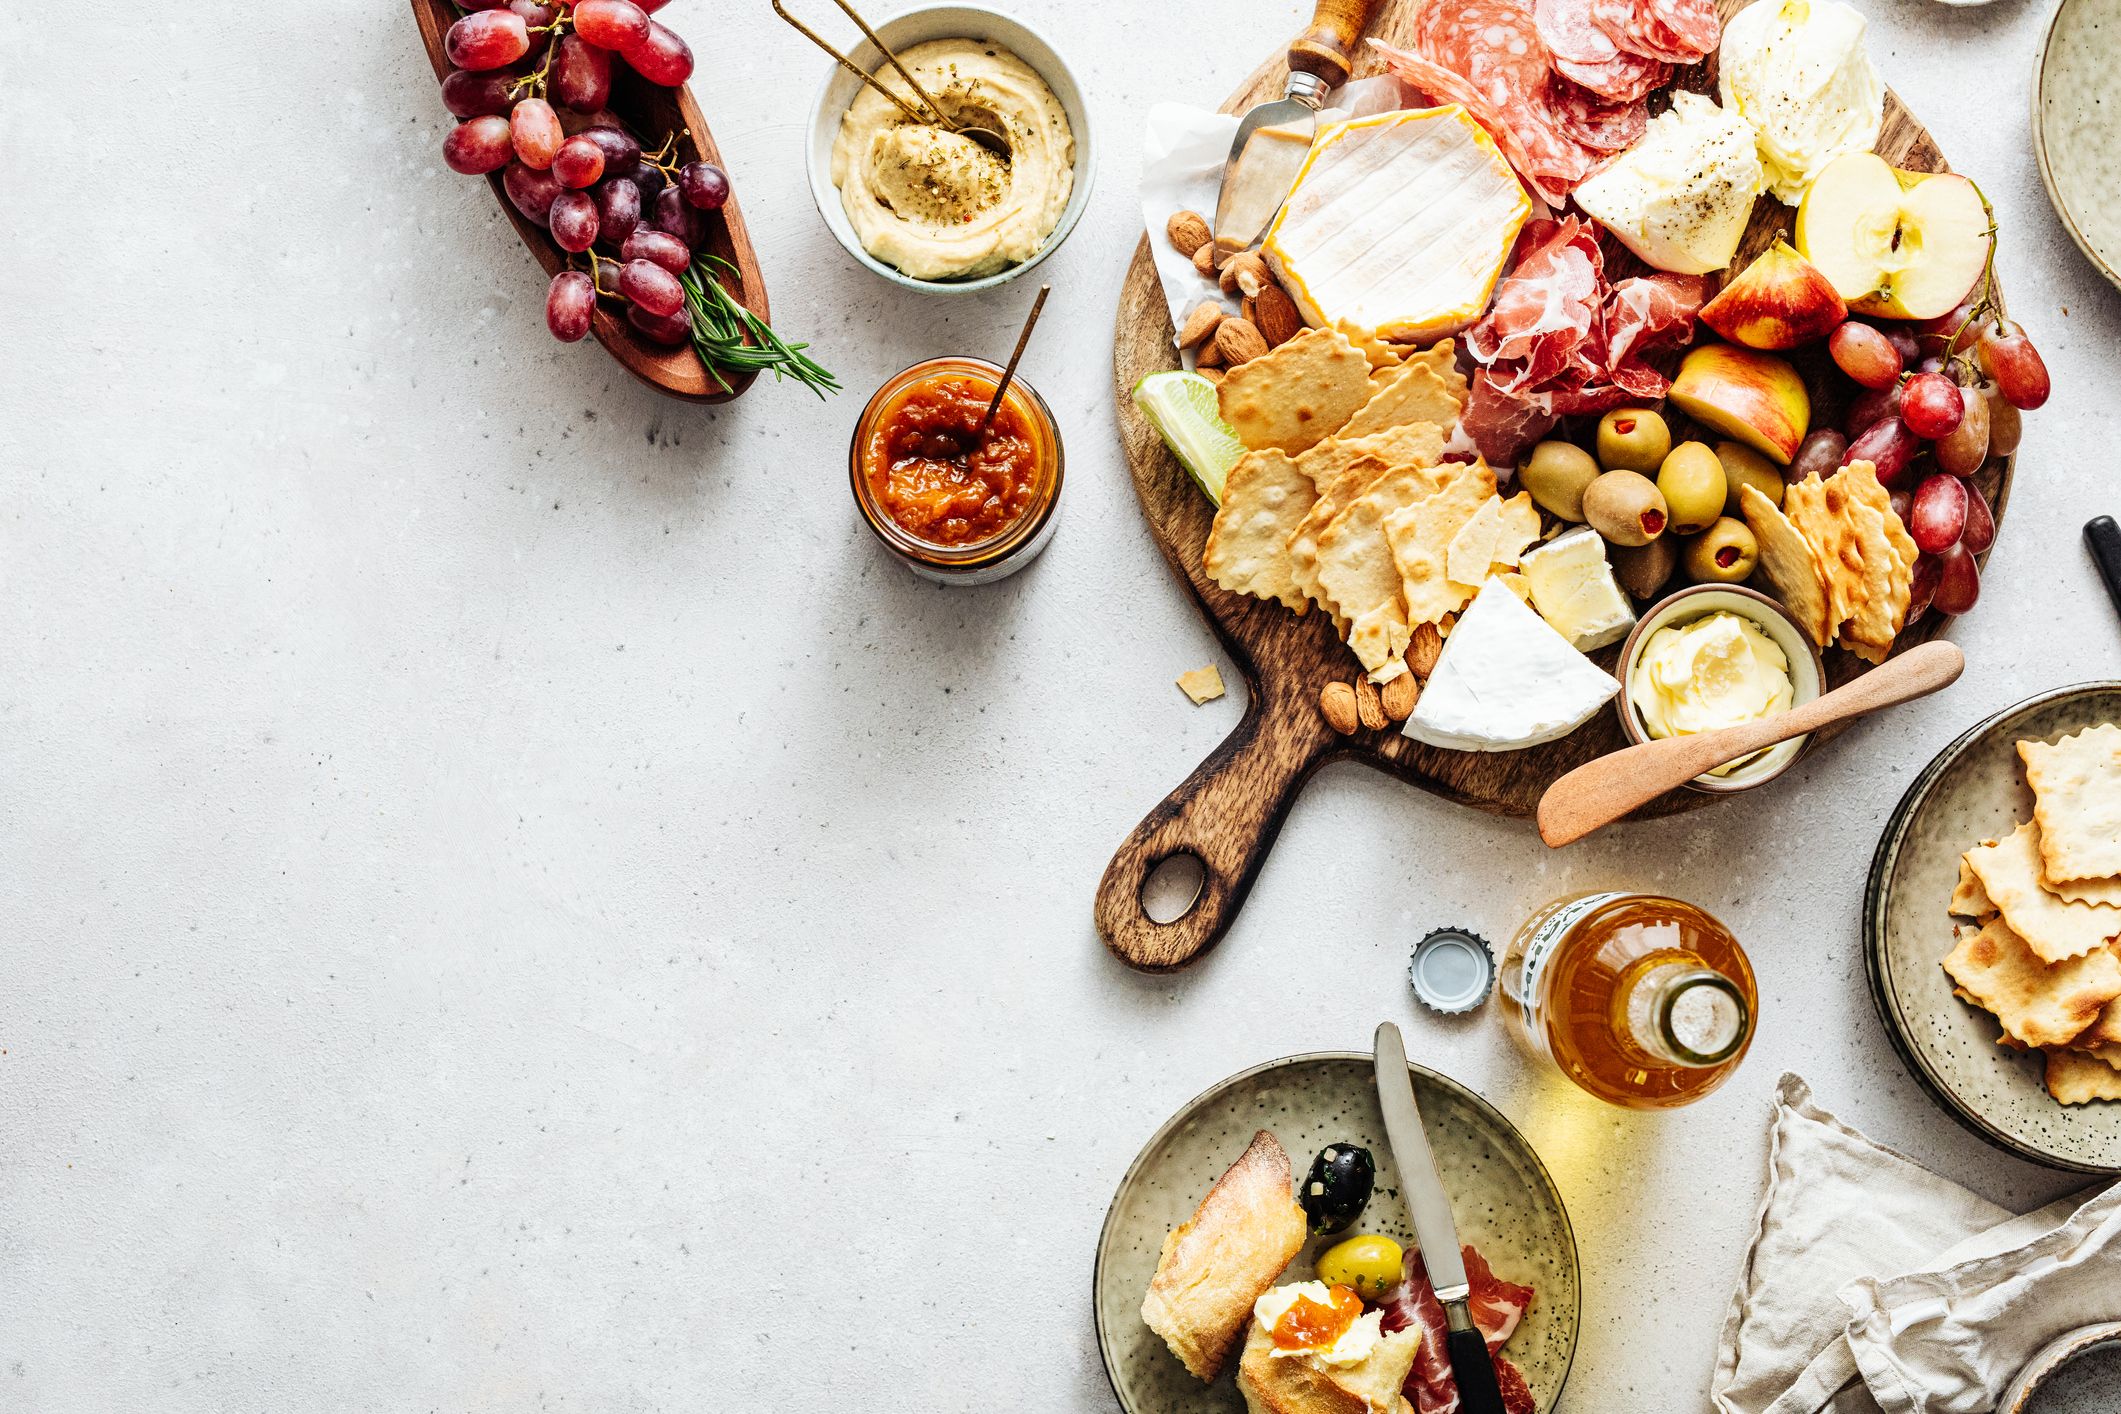 How To Build A Holiday Charcuterie Board - Lena's Kitchen